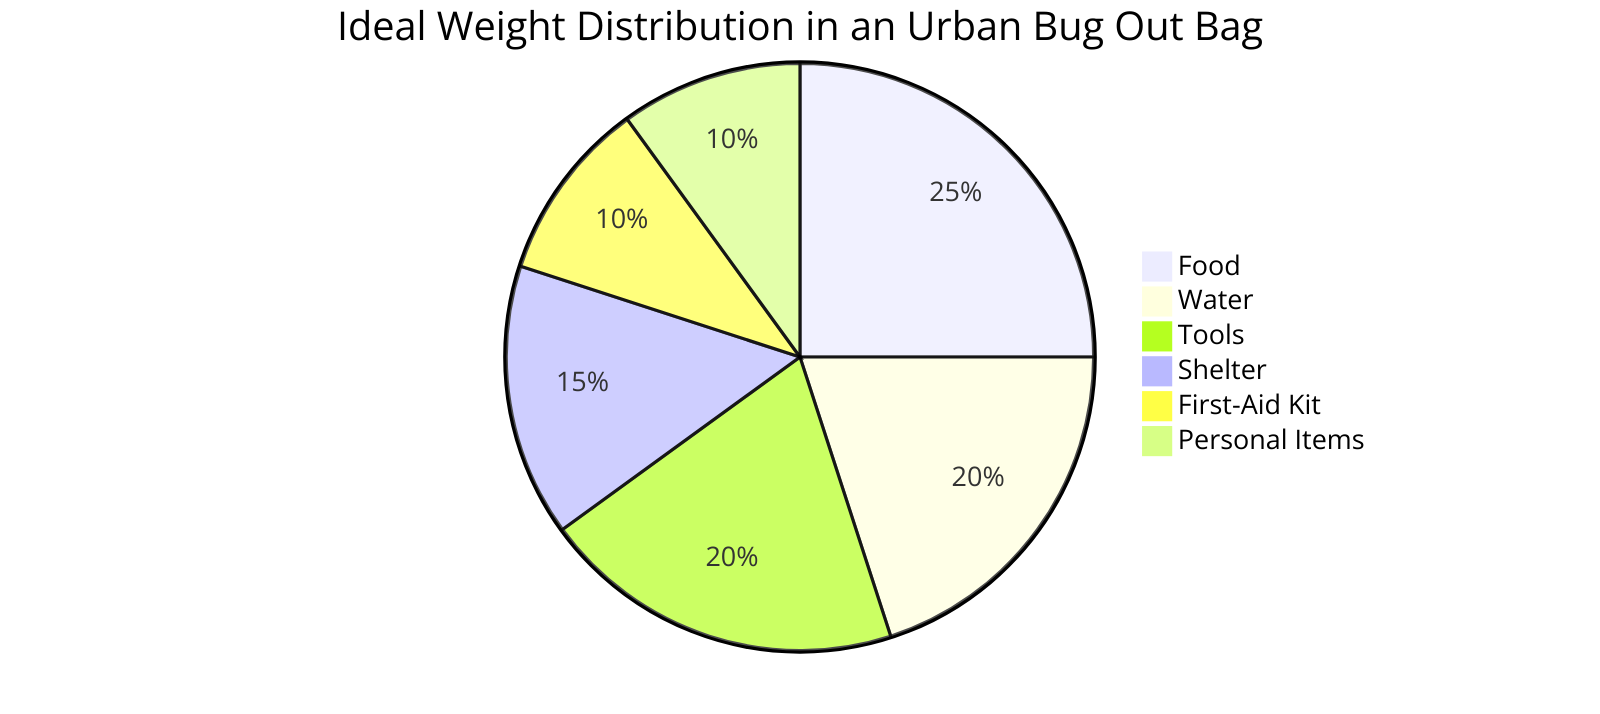  the ideal distribution of weight among essential items in an urban bug out bag, such as water, food, shelter, and tools, to encourage efficient packing